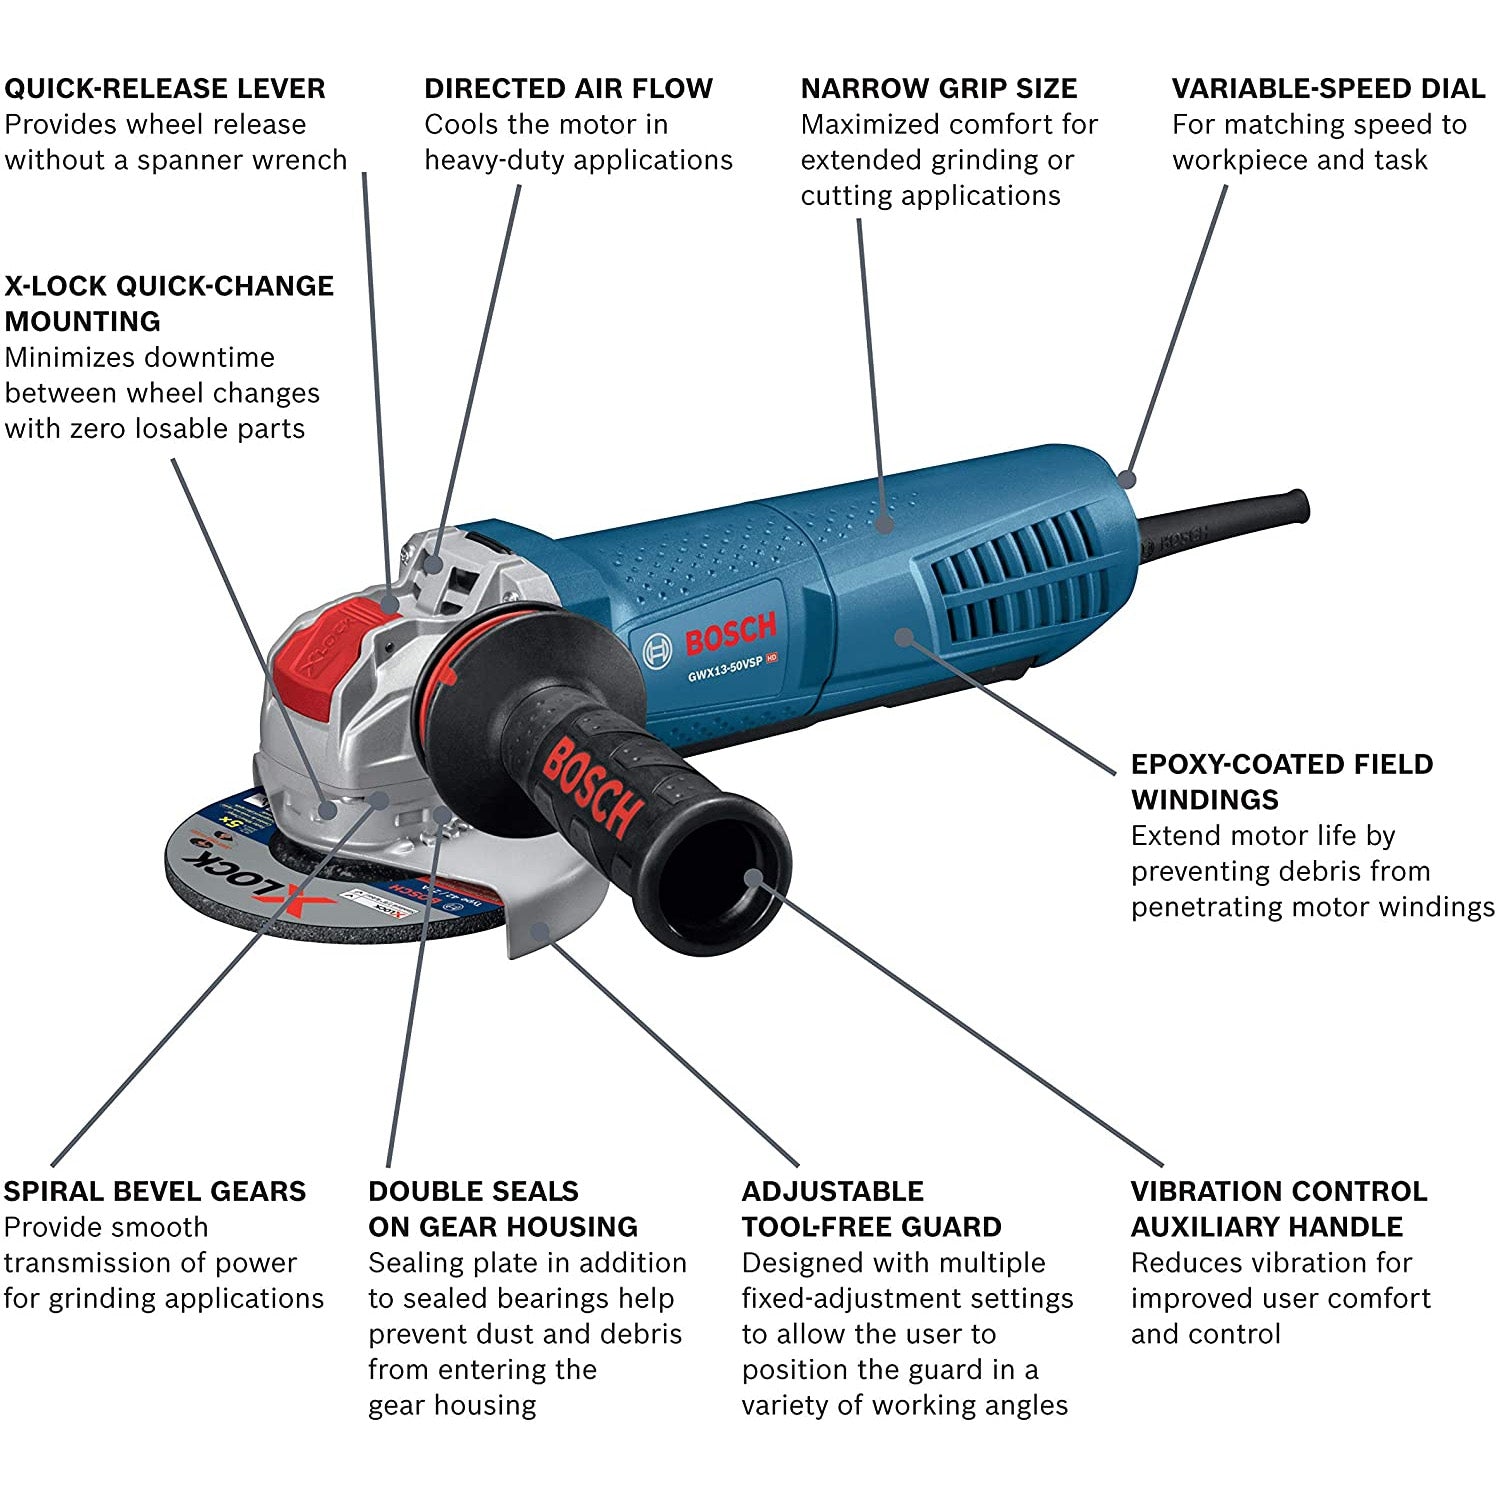 Bosch GWX13-50VSP 5" X-LOCK Variable-Speed Angle Grinder with Paddle Switch